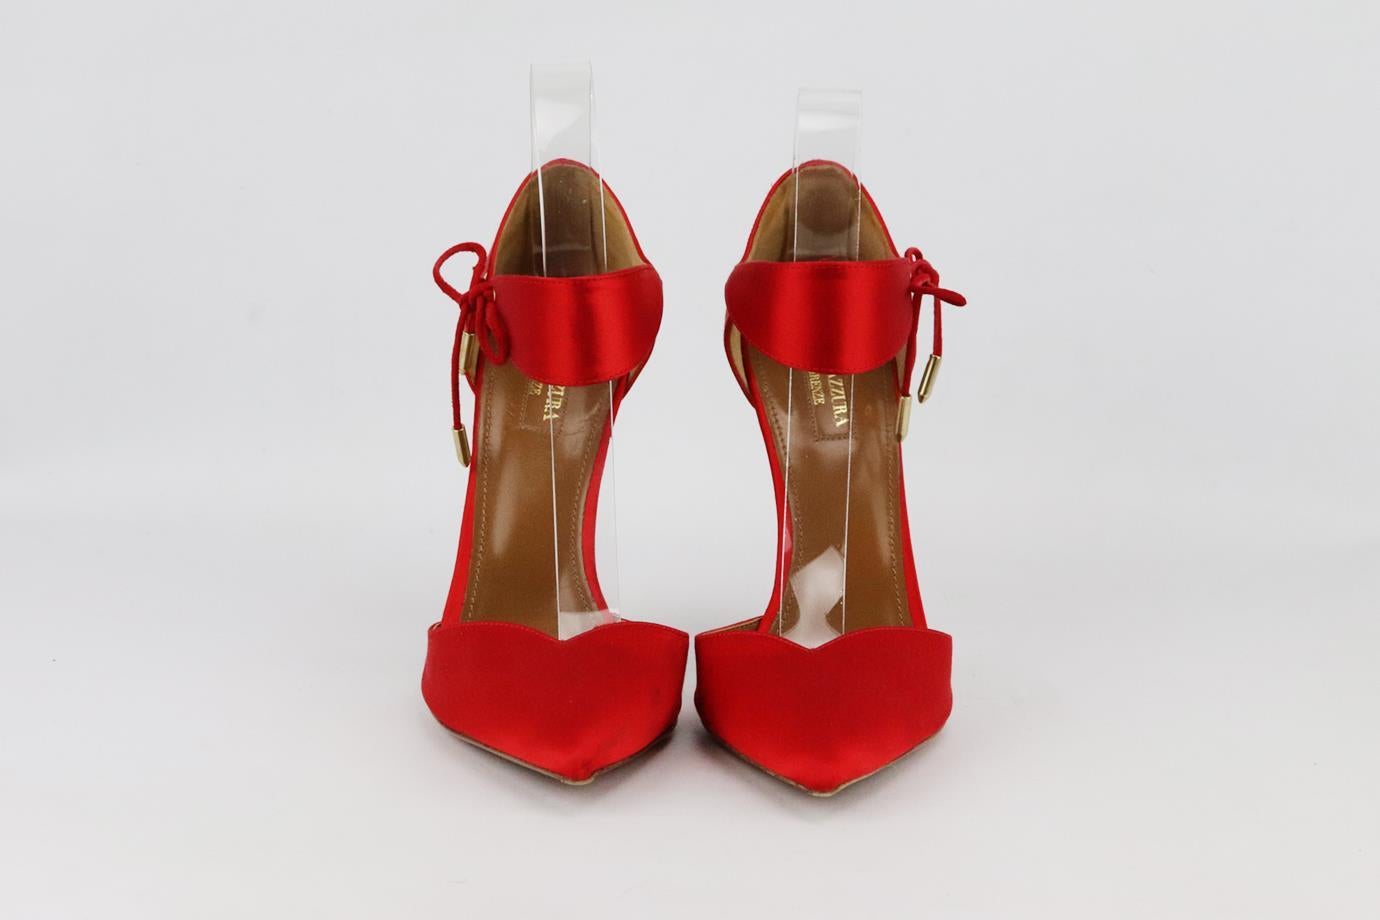 Aquazzura Candela satin pumps. Made from red satin with pointed toe and ankle strap. Red. Tie fastening at side. Comes with box and dustbag. Size: EU 37.5 (UK 4.5, US 7.5). Insole: 10.2 in. Heel: 3.5 in
